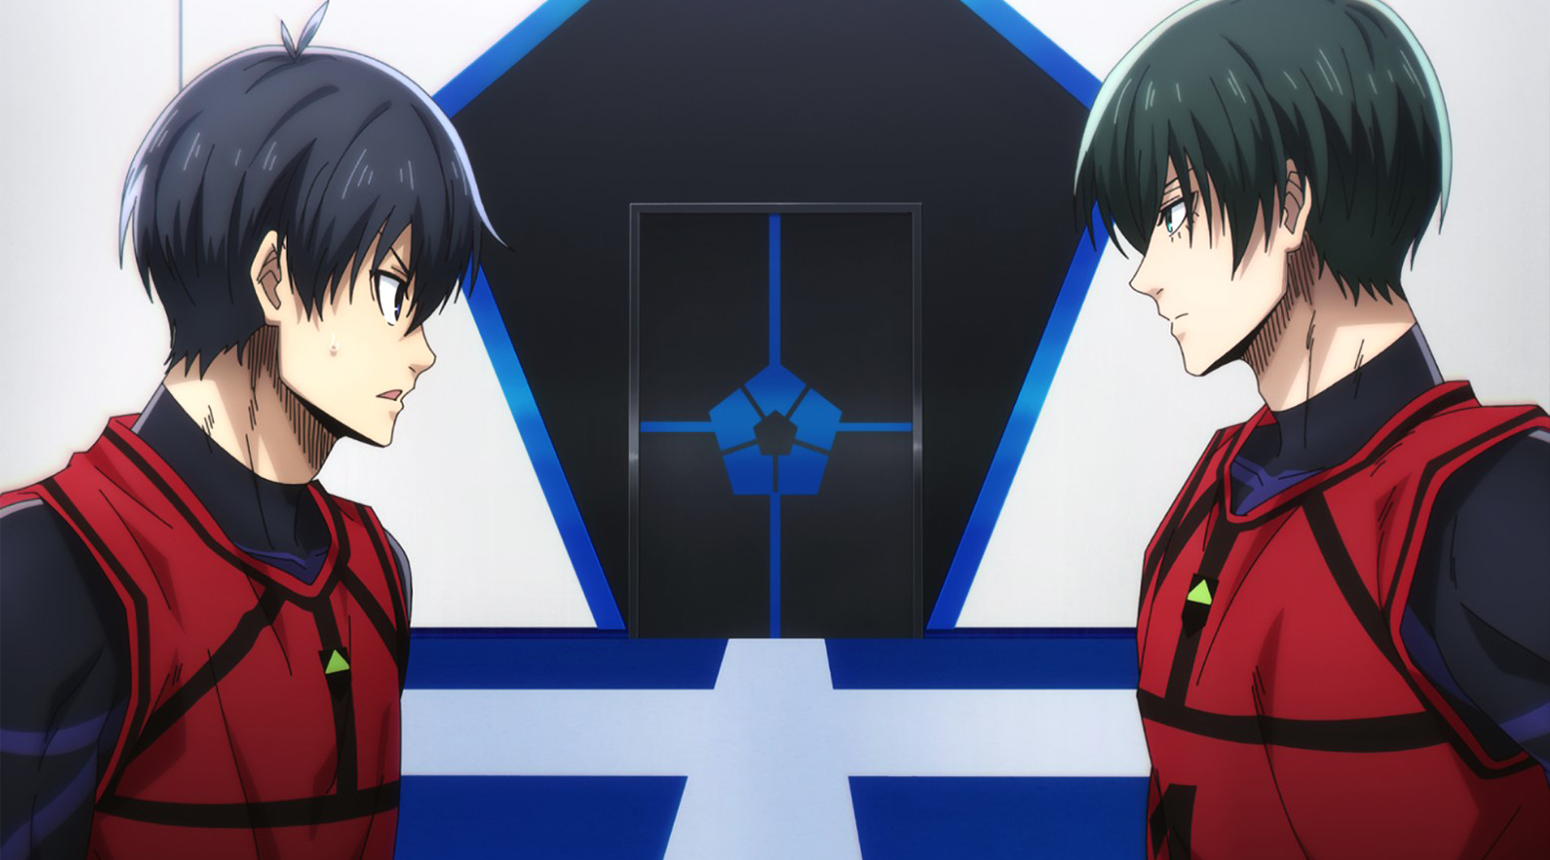 animes icons. — ⌕ blue lock - EP 13 • PREVIEW images. like or